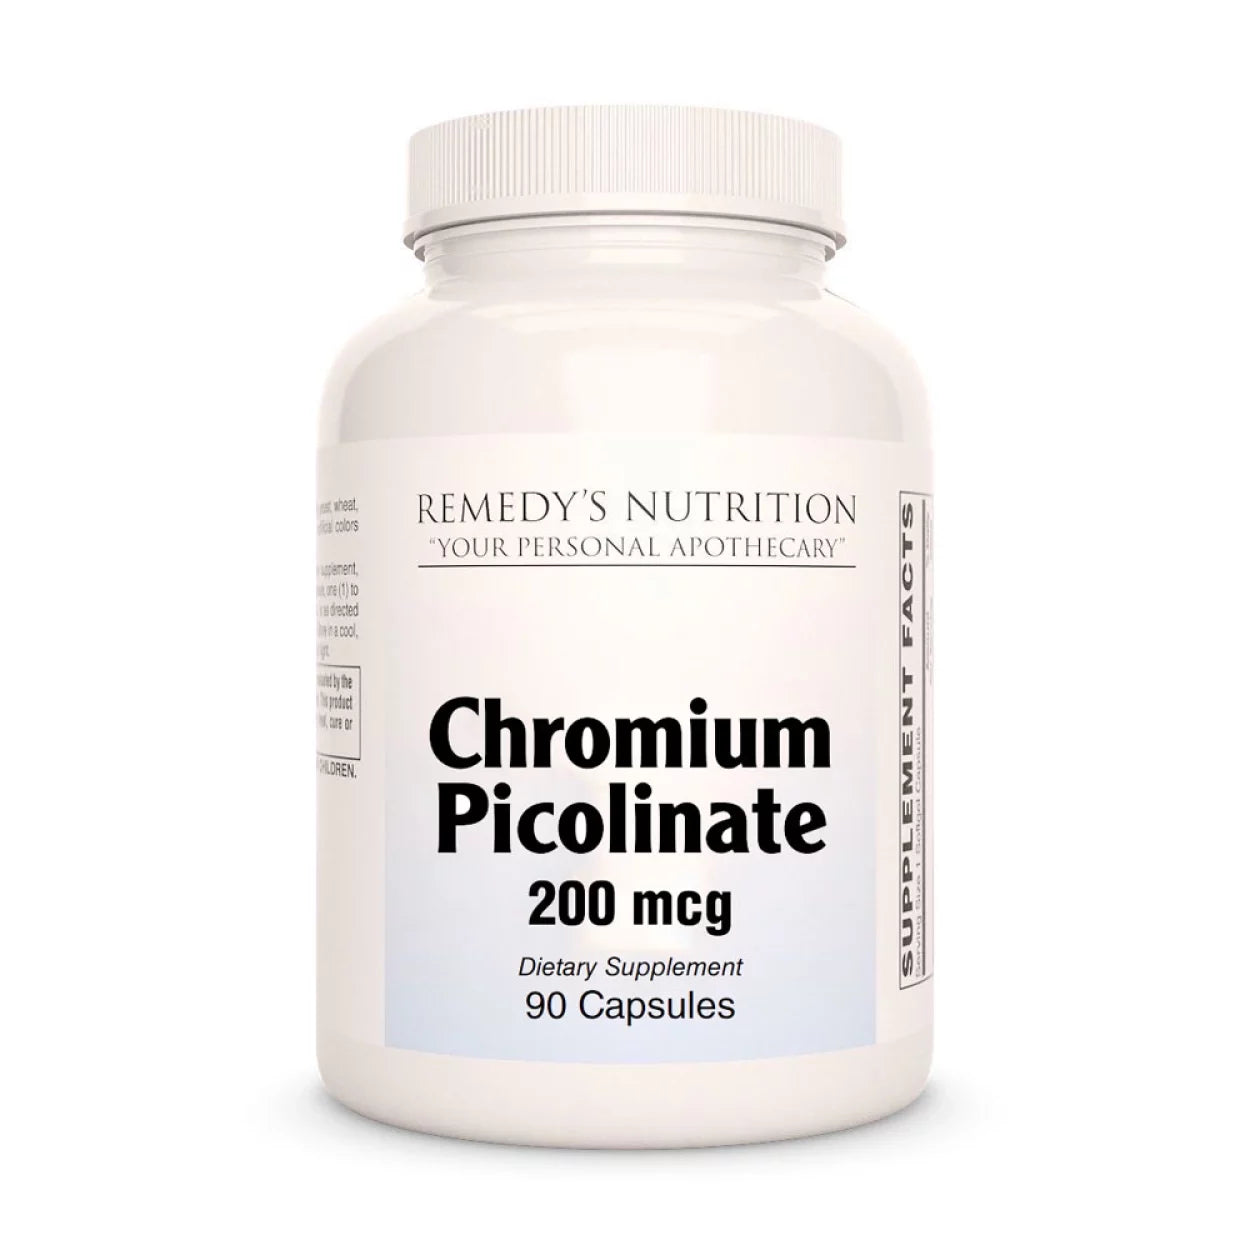 Image of Remedy's Nutrition® Chromium Picolinate Capsules Dietary Supplement front bottle. 200 mcg, No Fillers, No Additives. 